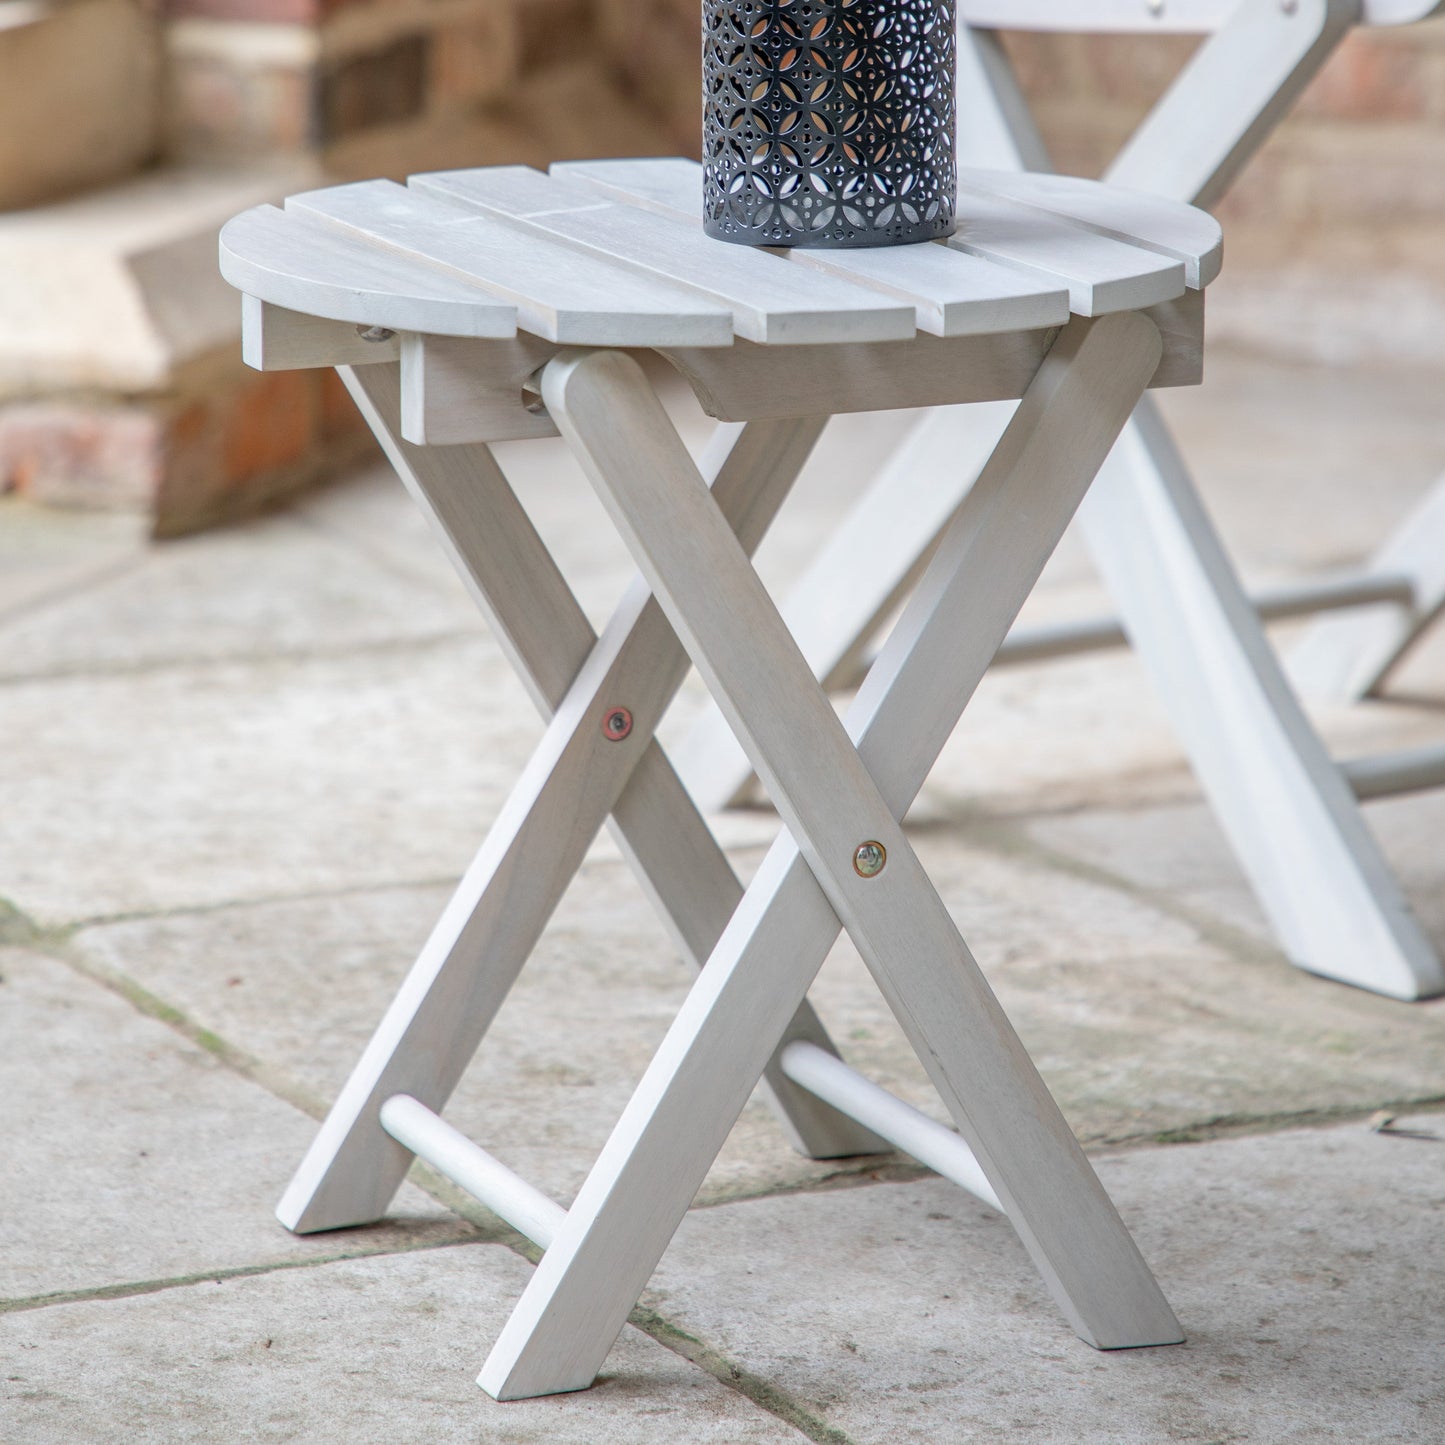 A Chillington Side Table, an interior decor piece from Kikiathome.co.uk, featuring a whitewash finish and adorned with a candle.